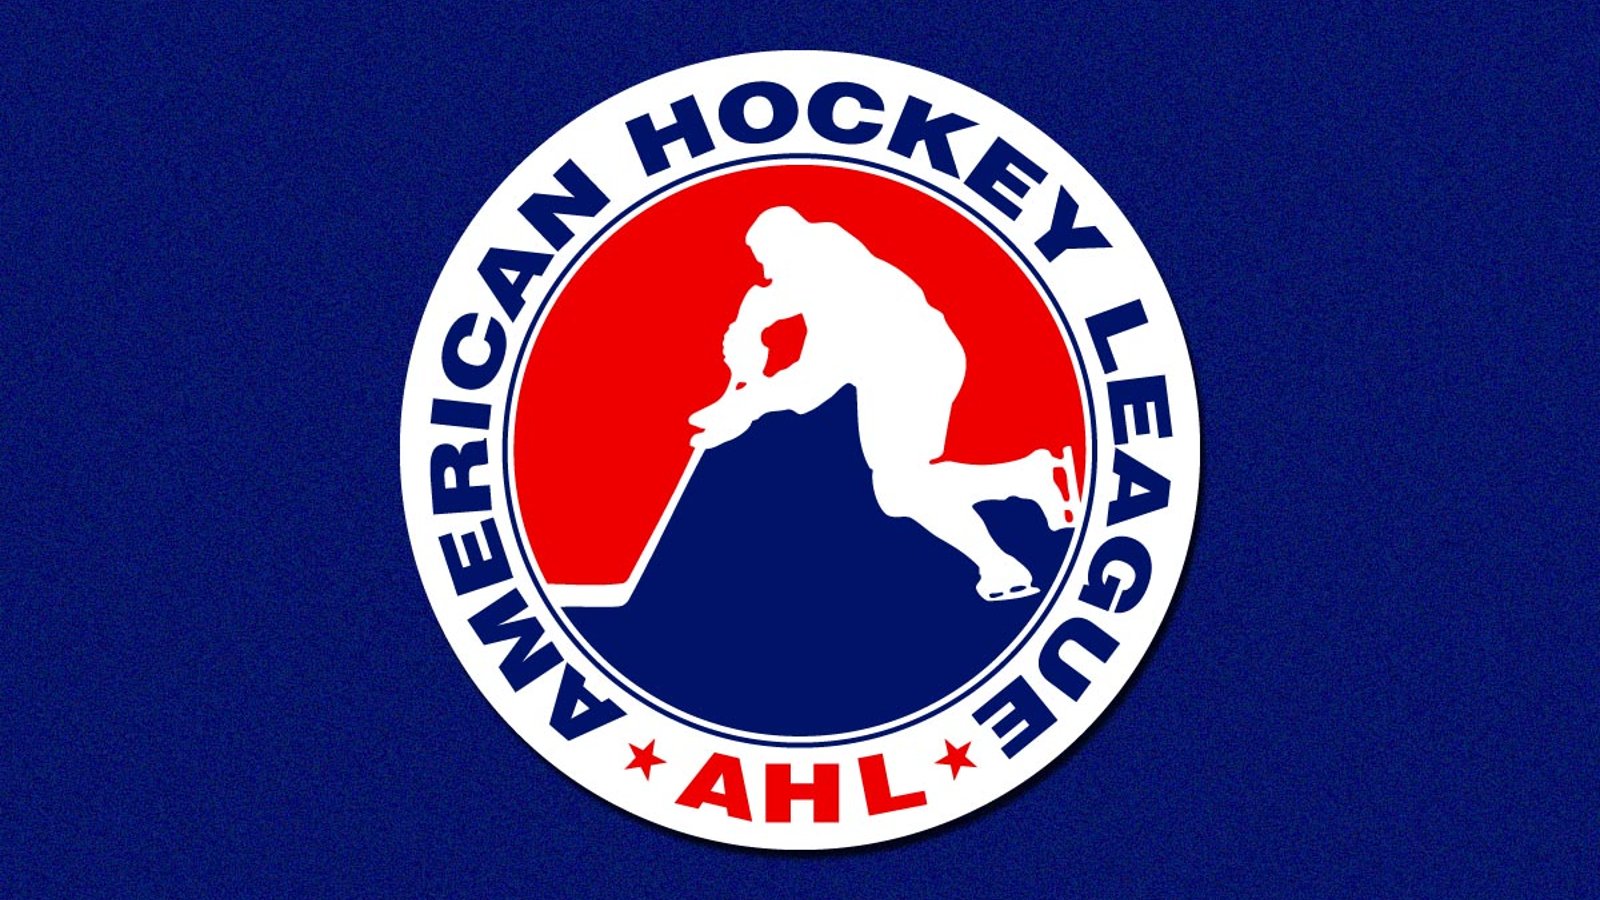 AHL releases update, tells players to go home